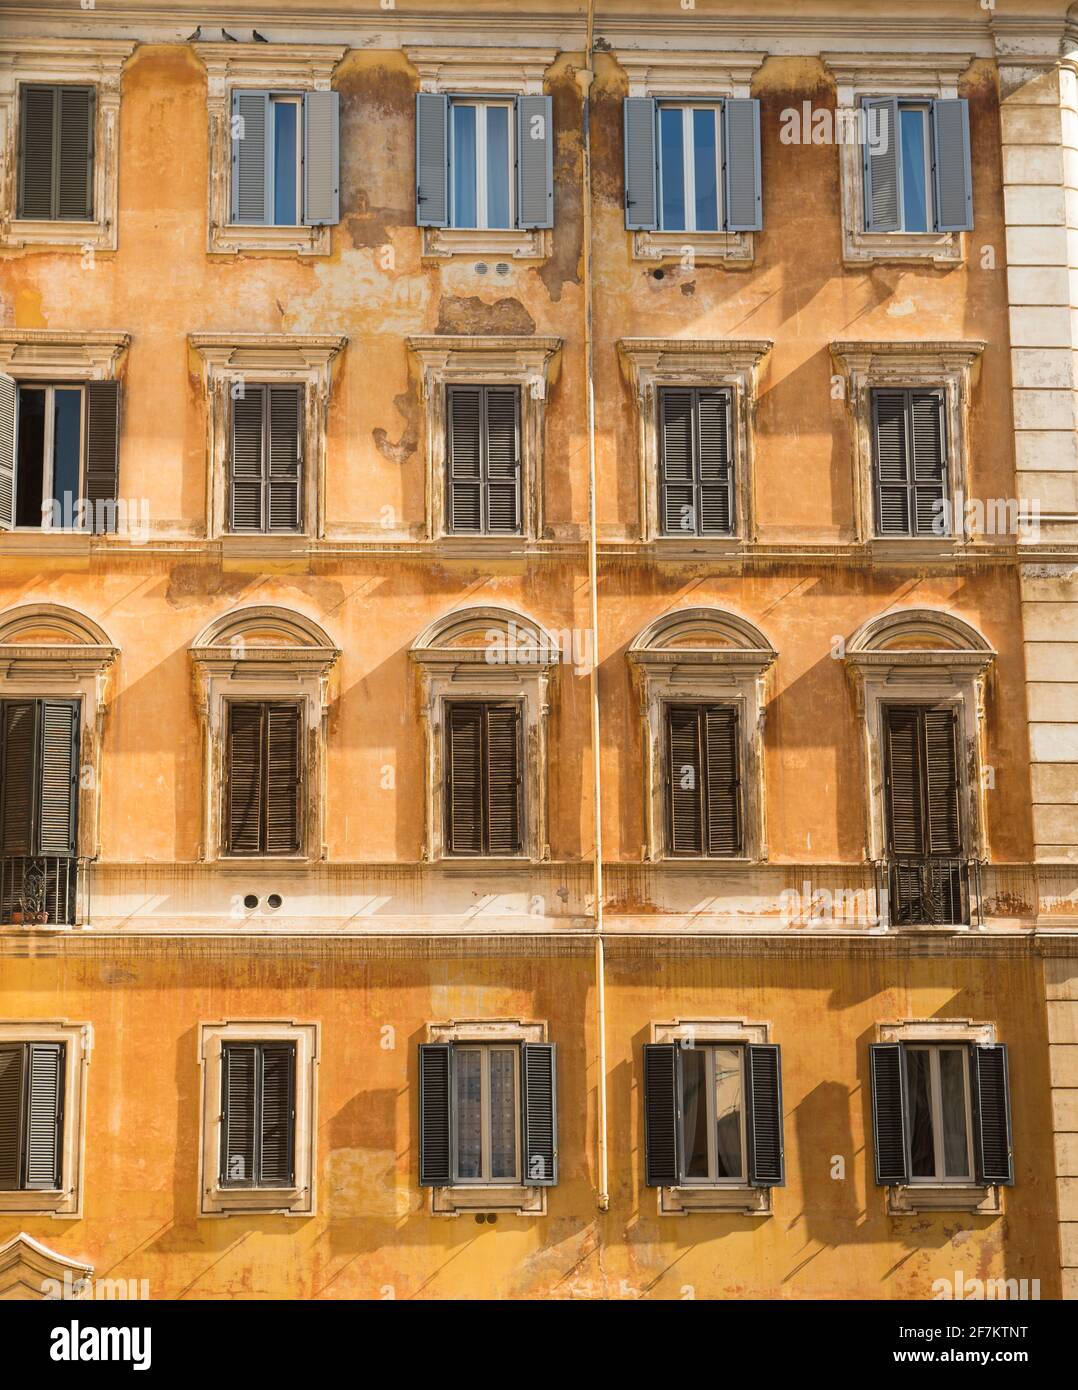 Typical old roman house facade with multiple windows ornaments. Stock Photo